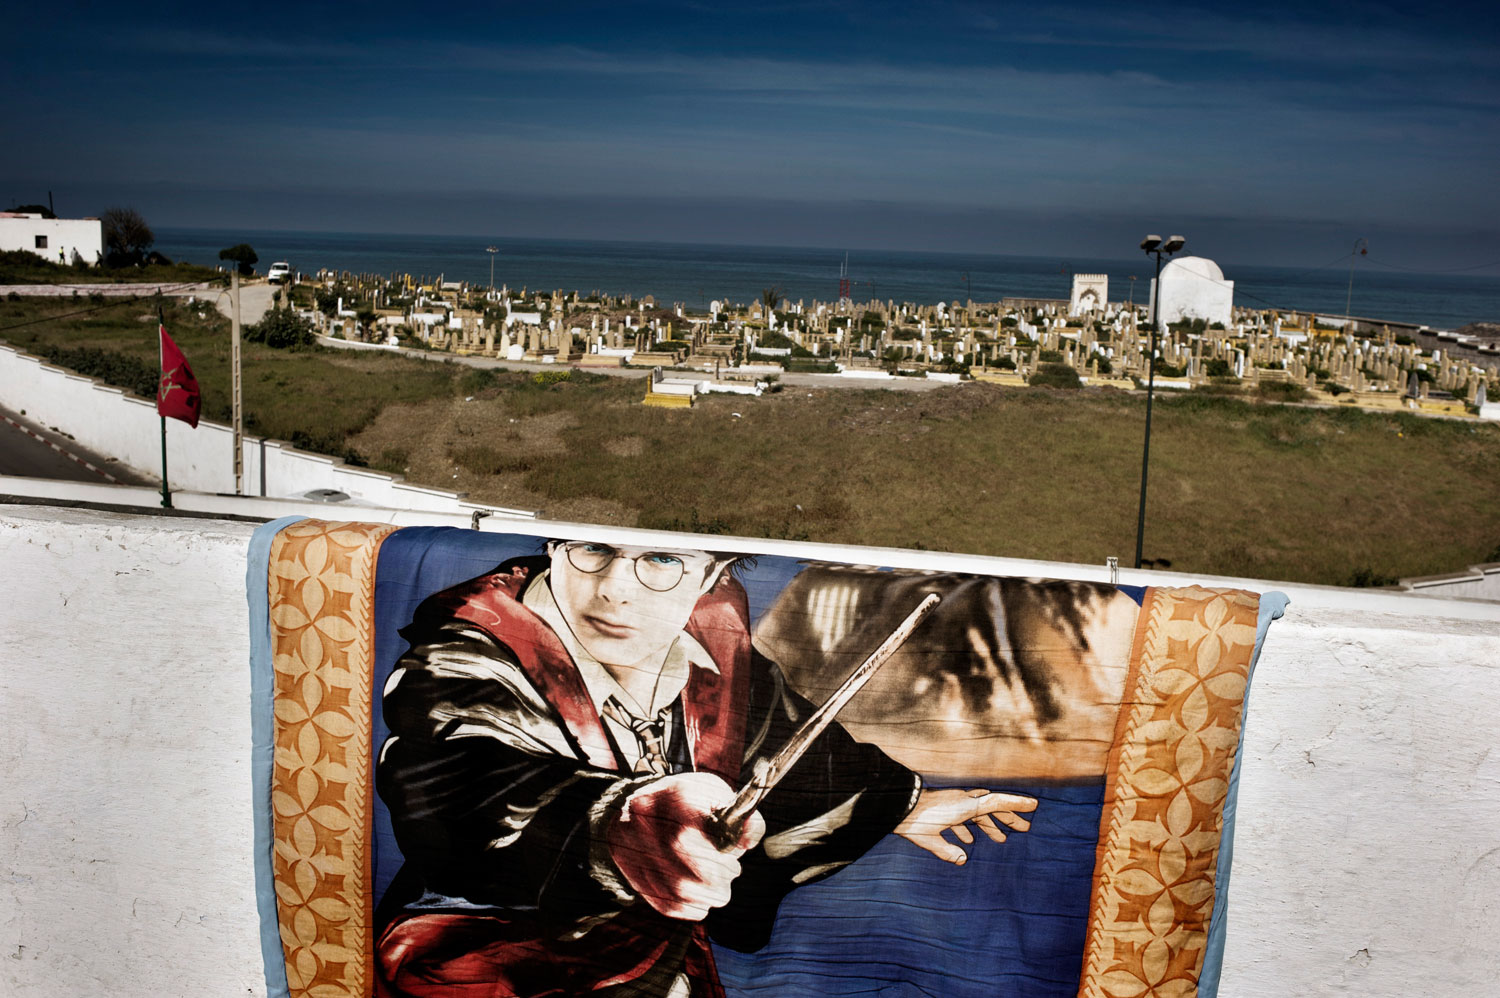 March 2012. At the shores of the Atlantic in Rabat, Morocco, a graveyard for illustrious Moroccans.